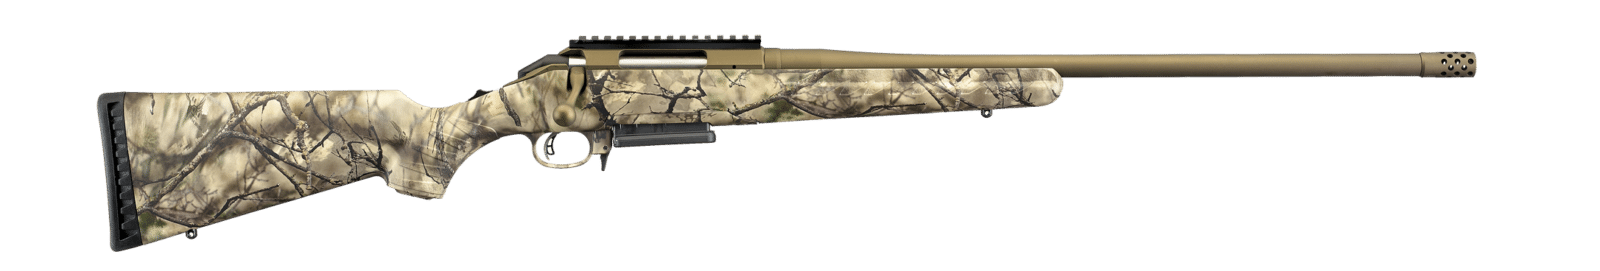 Ruger American with Go Wild Camo